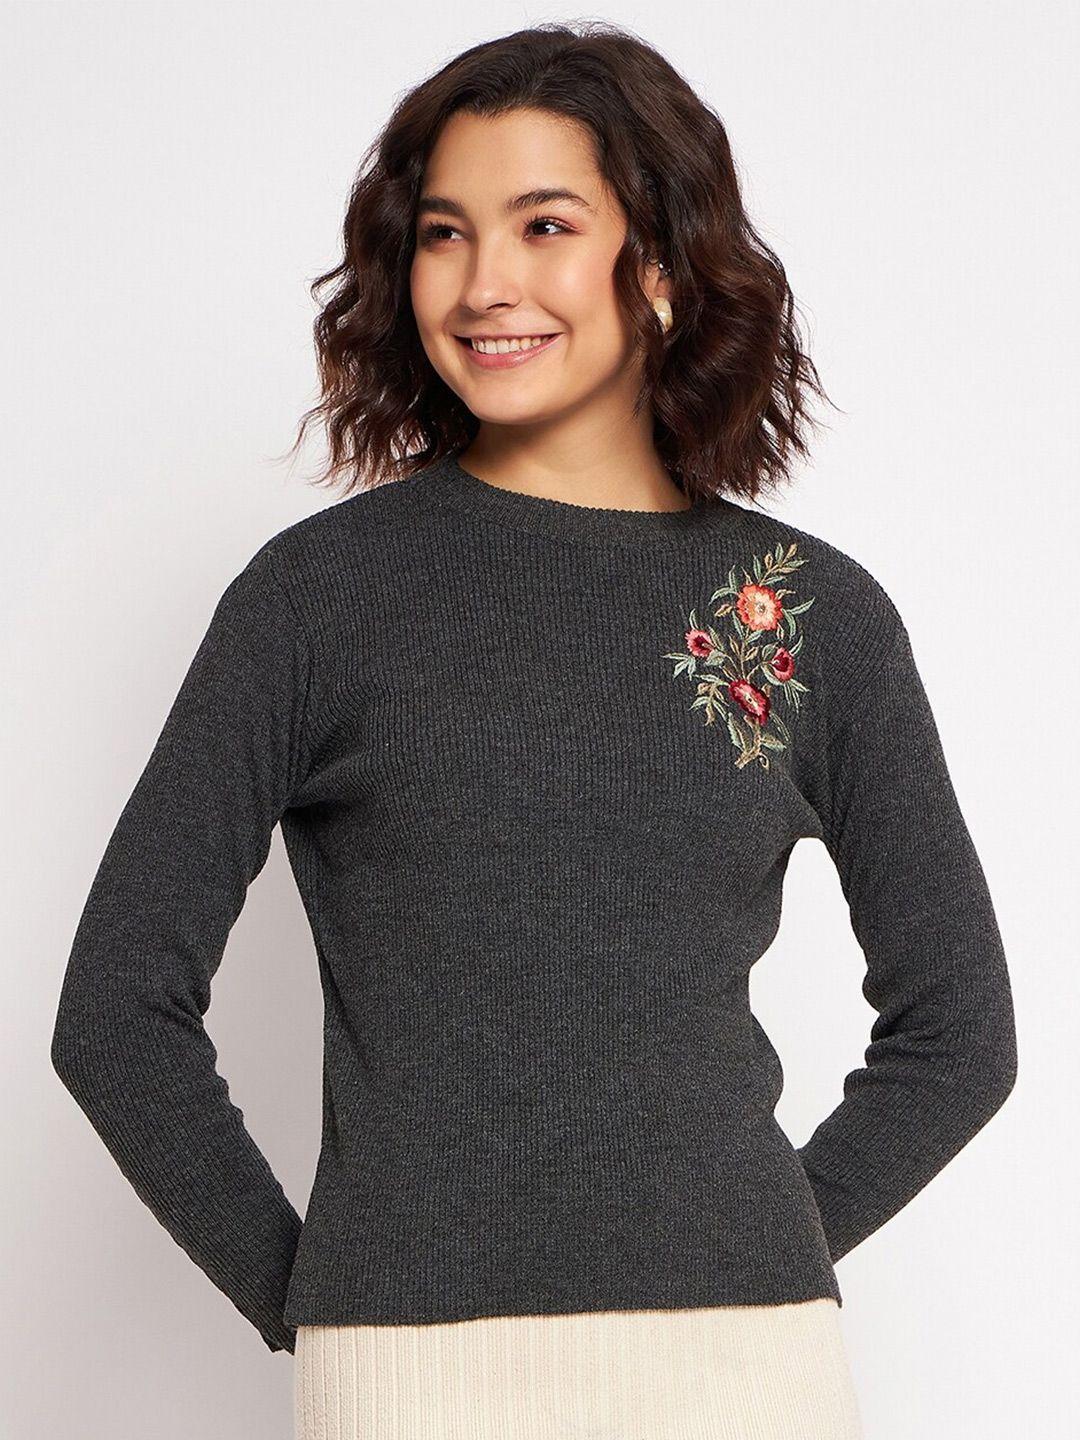 clapton woollen pullover with floral embroidered detail